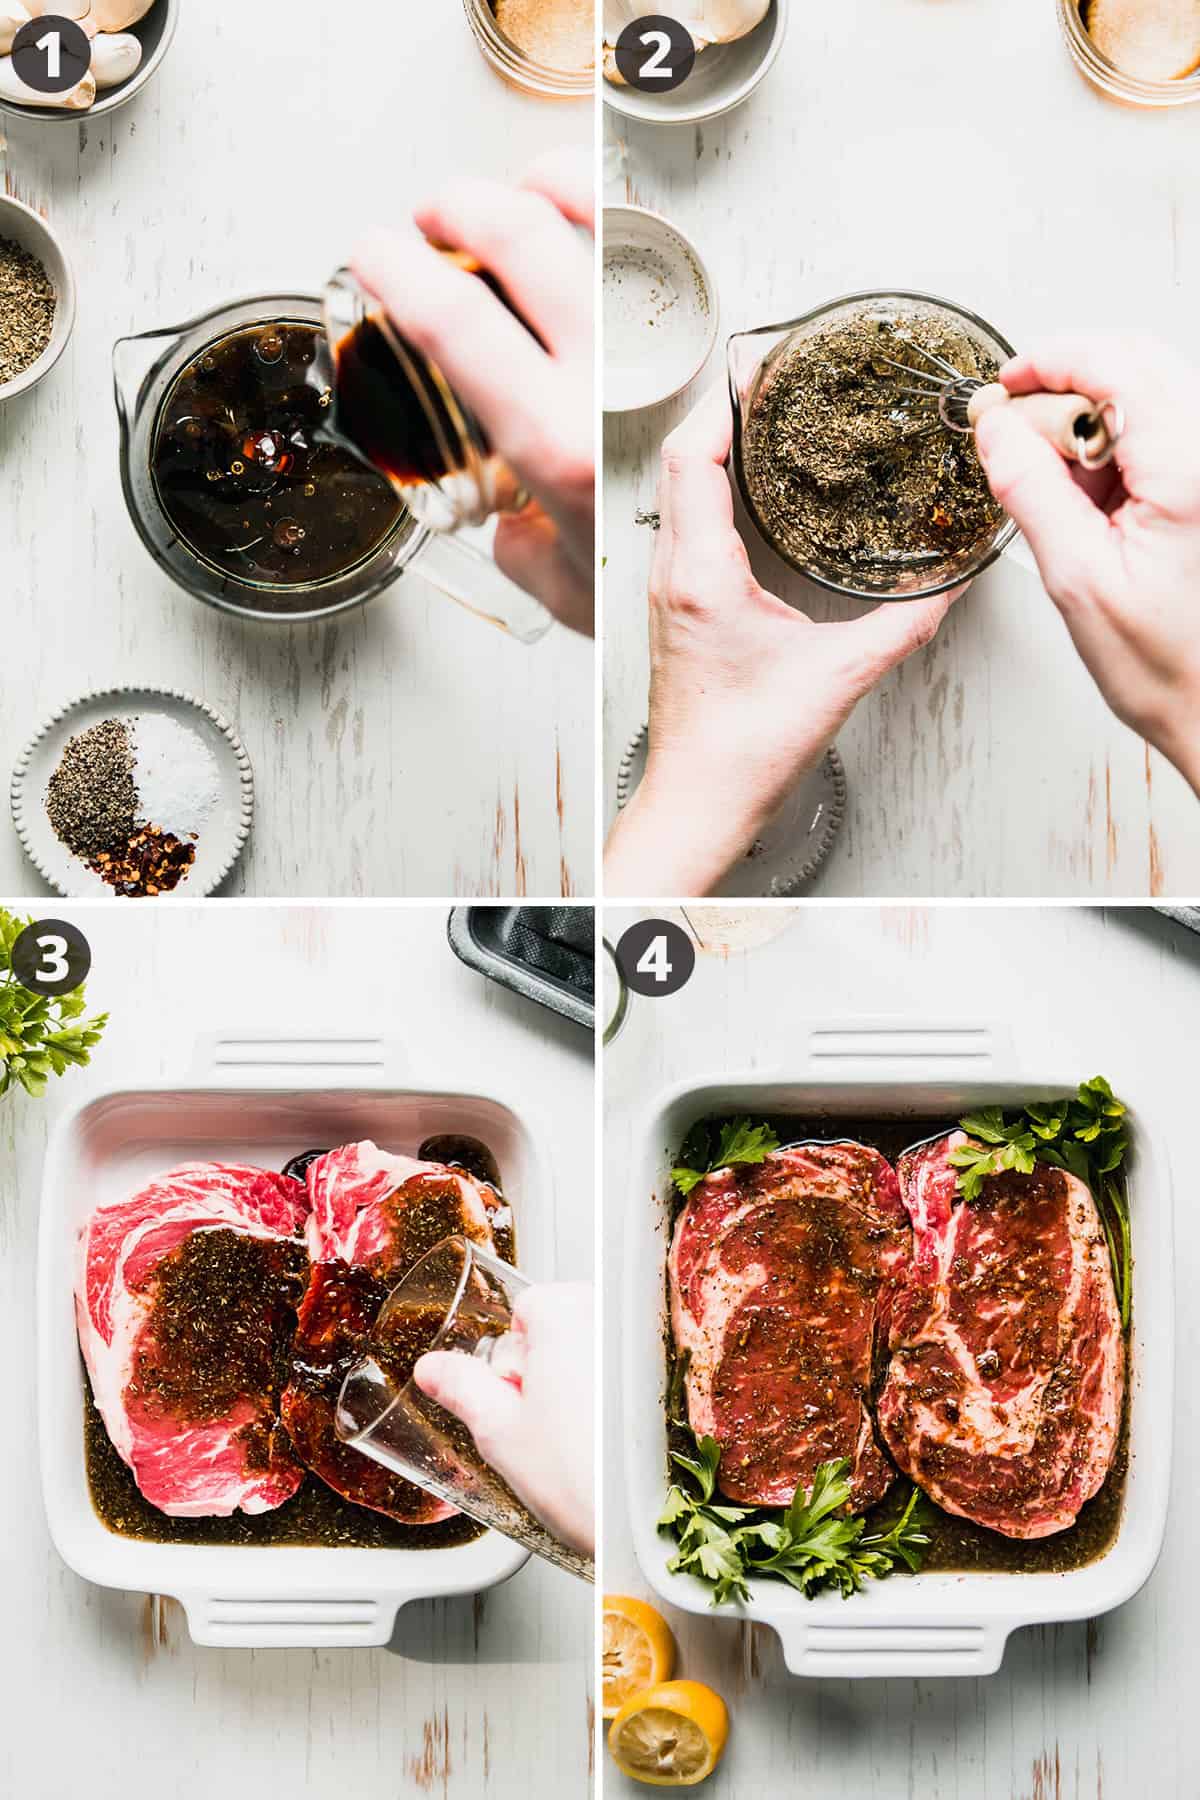 Pouring marinade over steaks